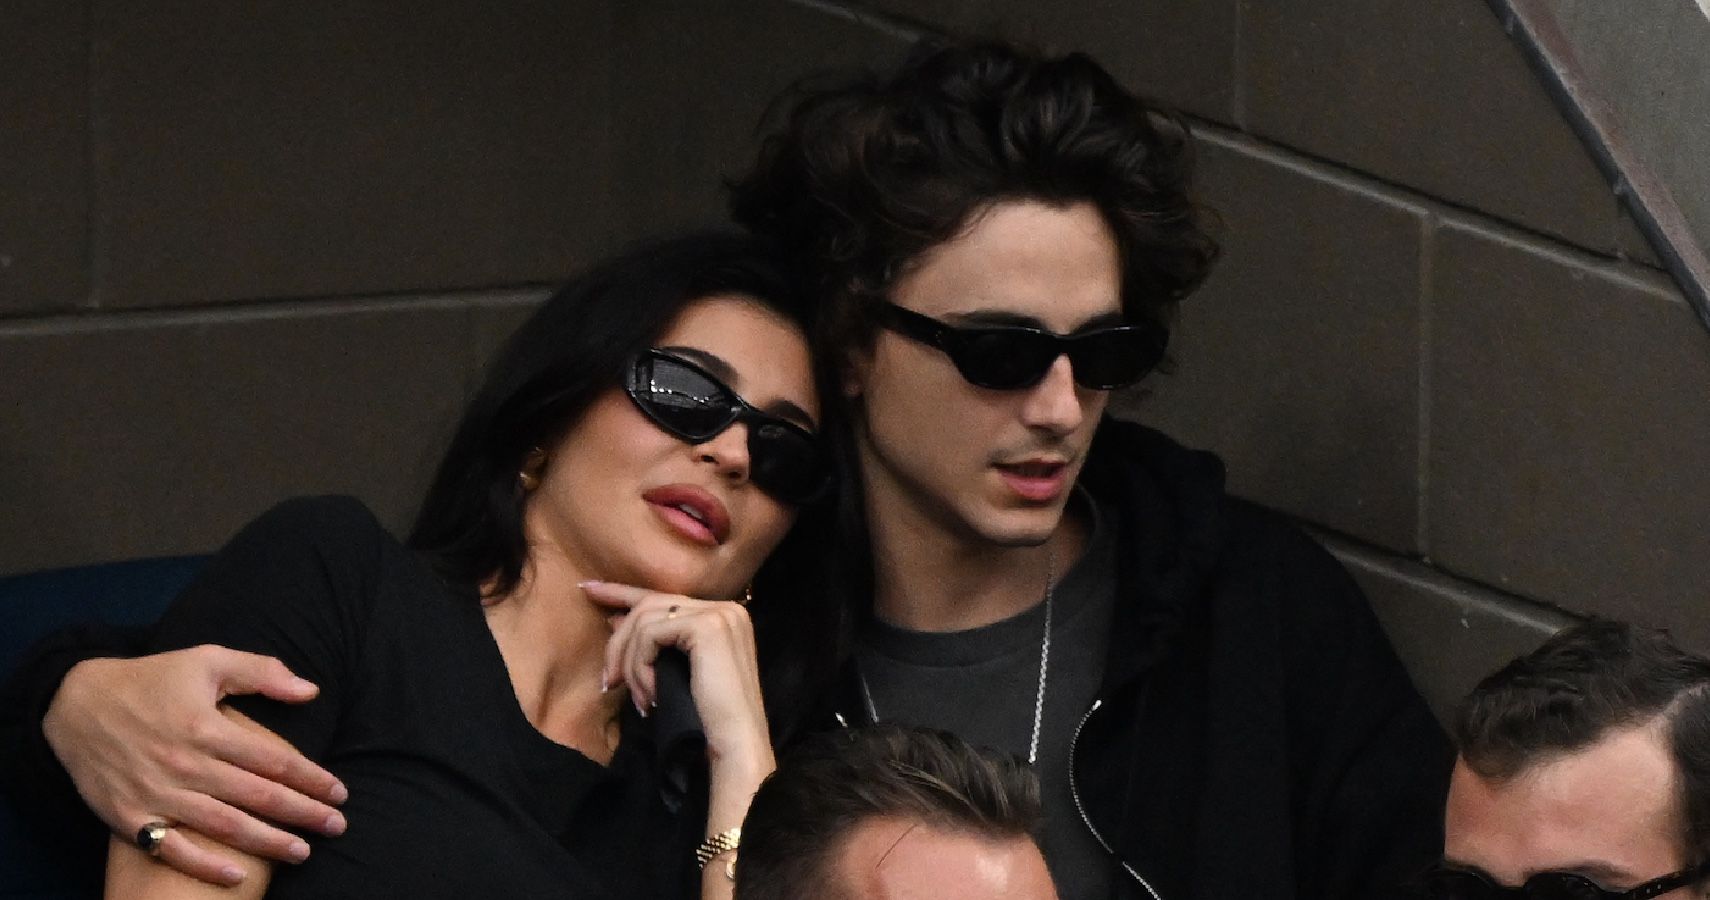 Kylie Jenner and Timothee Chalamet watching a tennis match 